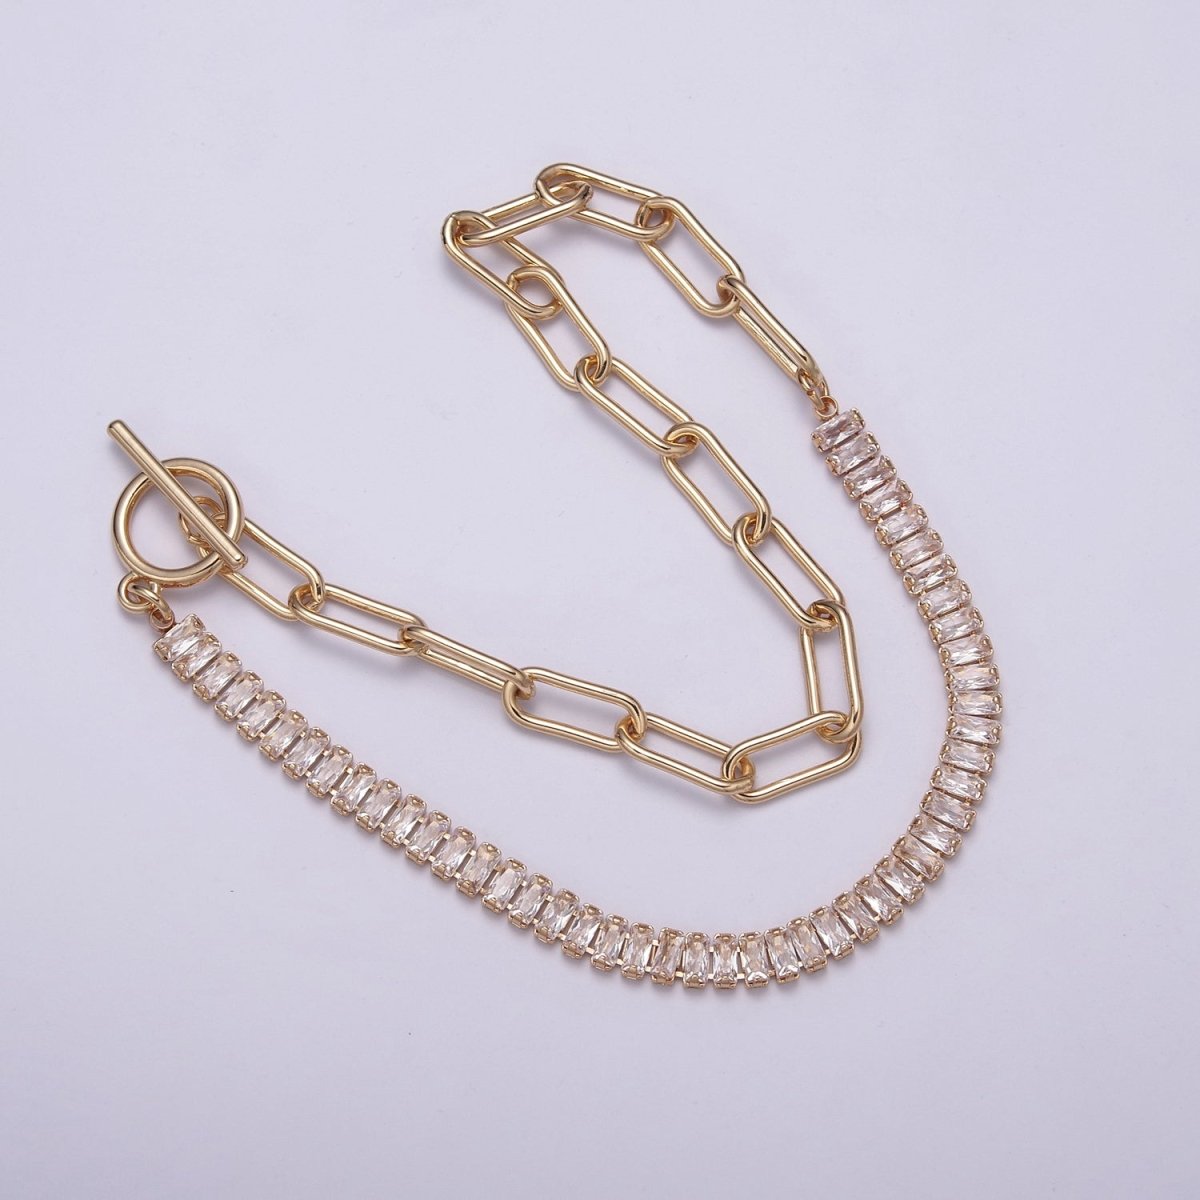 15.5" Fusion Necklace : Half Tennis Chain, Half PaperClip Chain, Statement 16K Gold Necklace with Lobster Clasps | WA-547 Clearance Pricing - DLUXCA